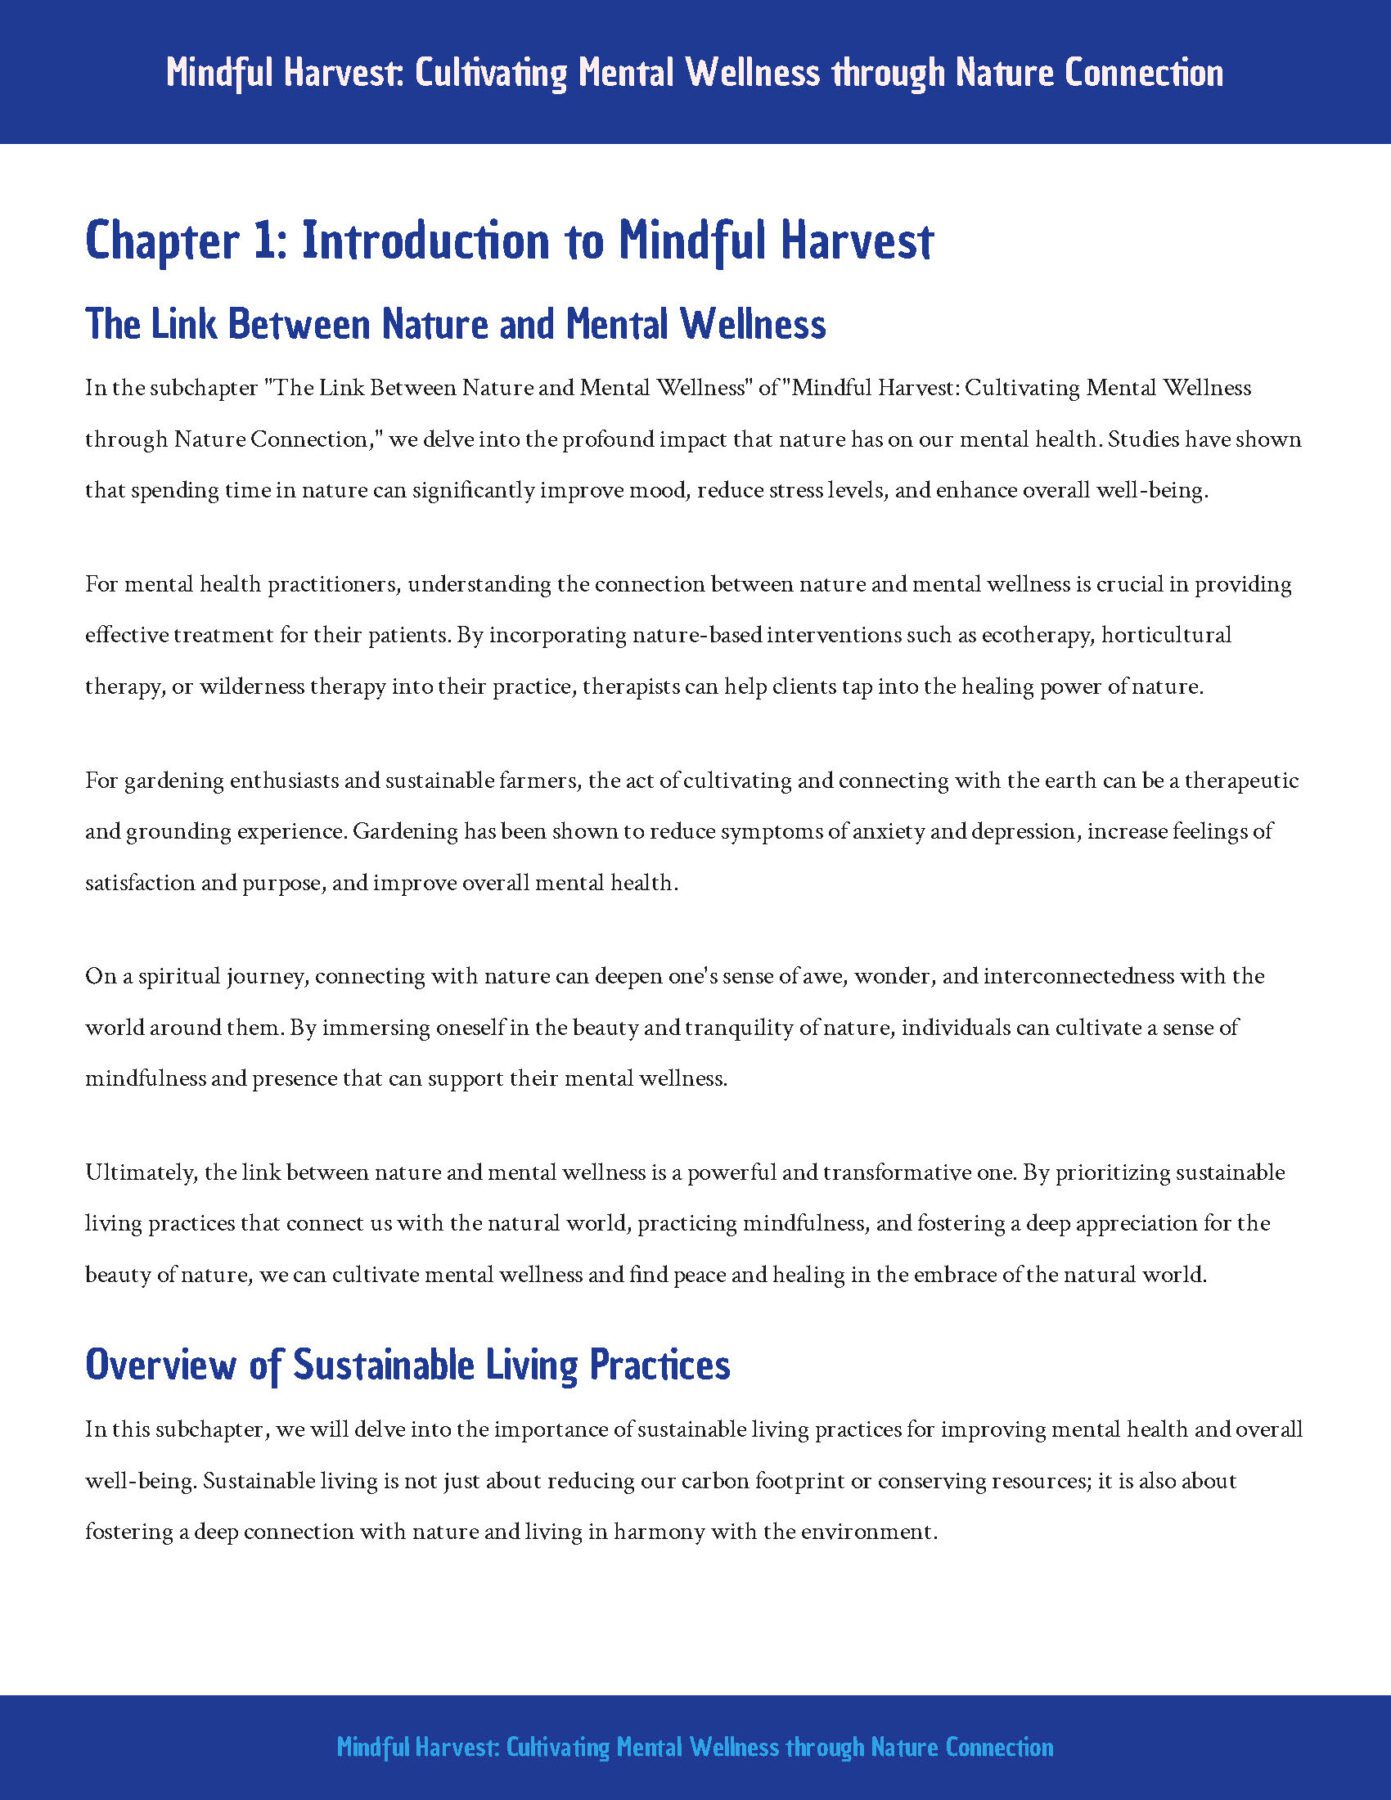 mindful-harvest-cultivating-mental-wellness-through-nature-connection_65d938f3_Page_05